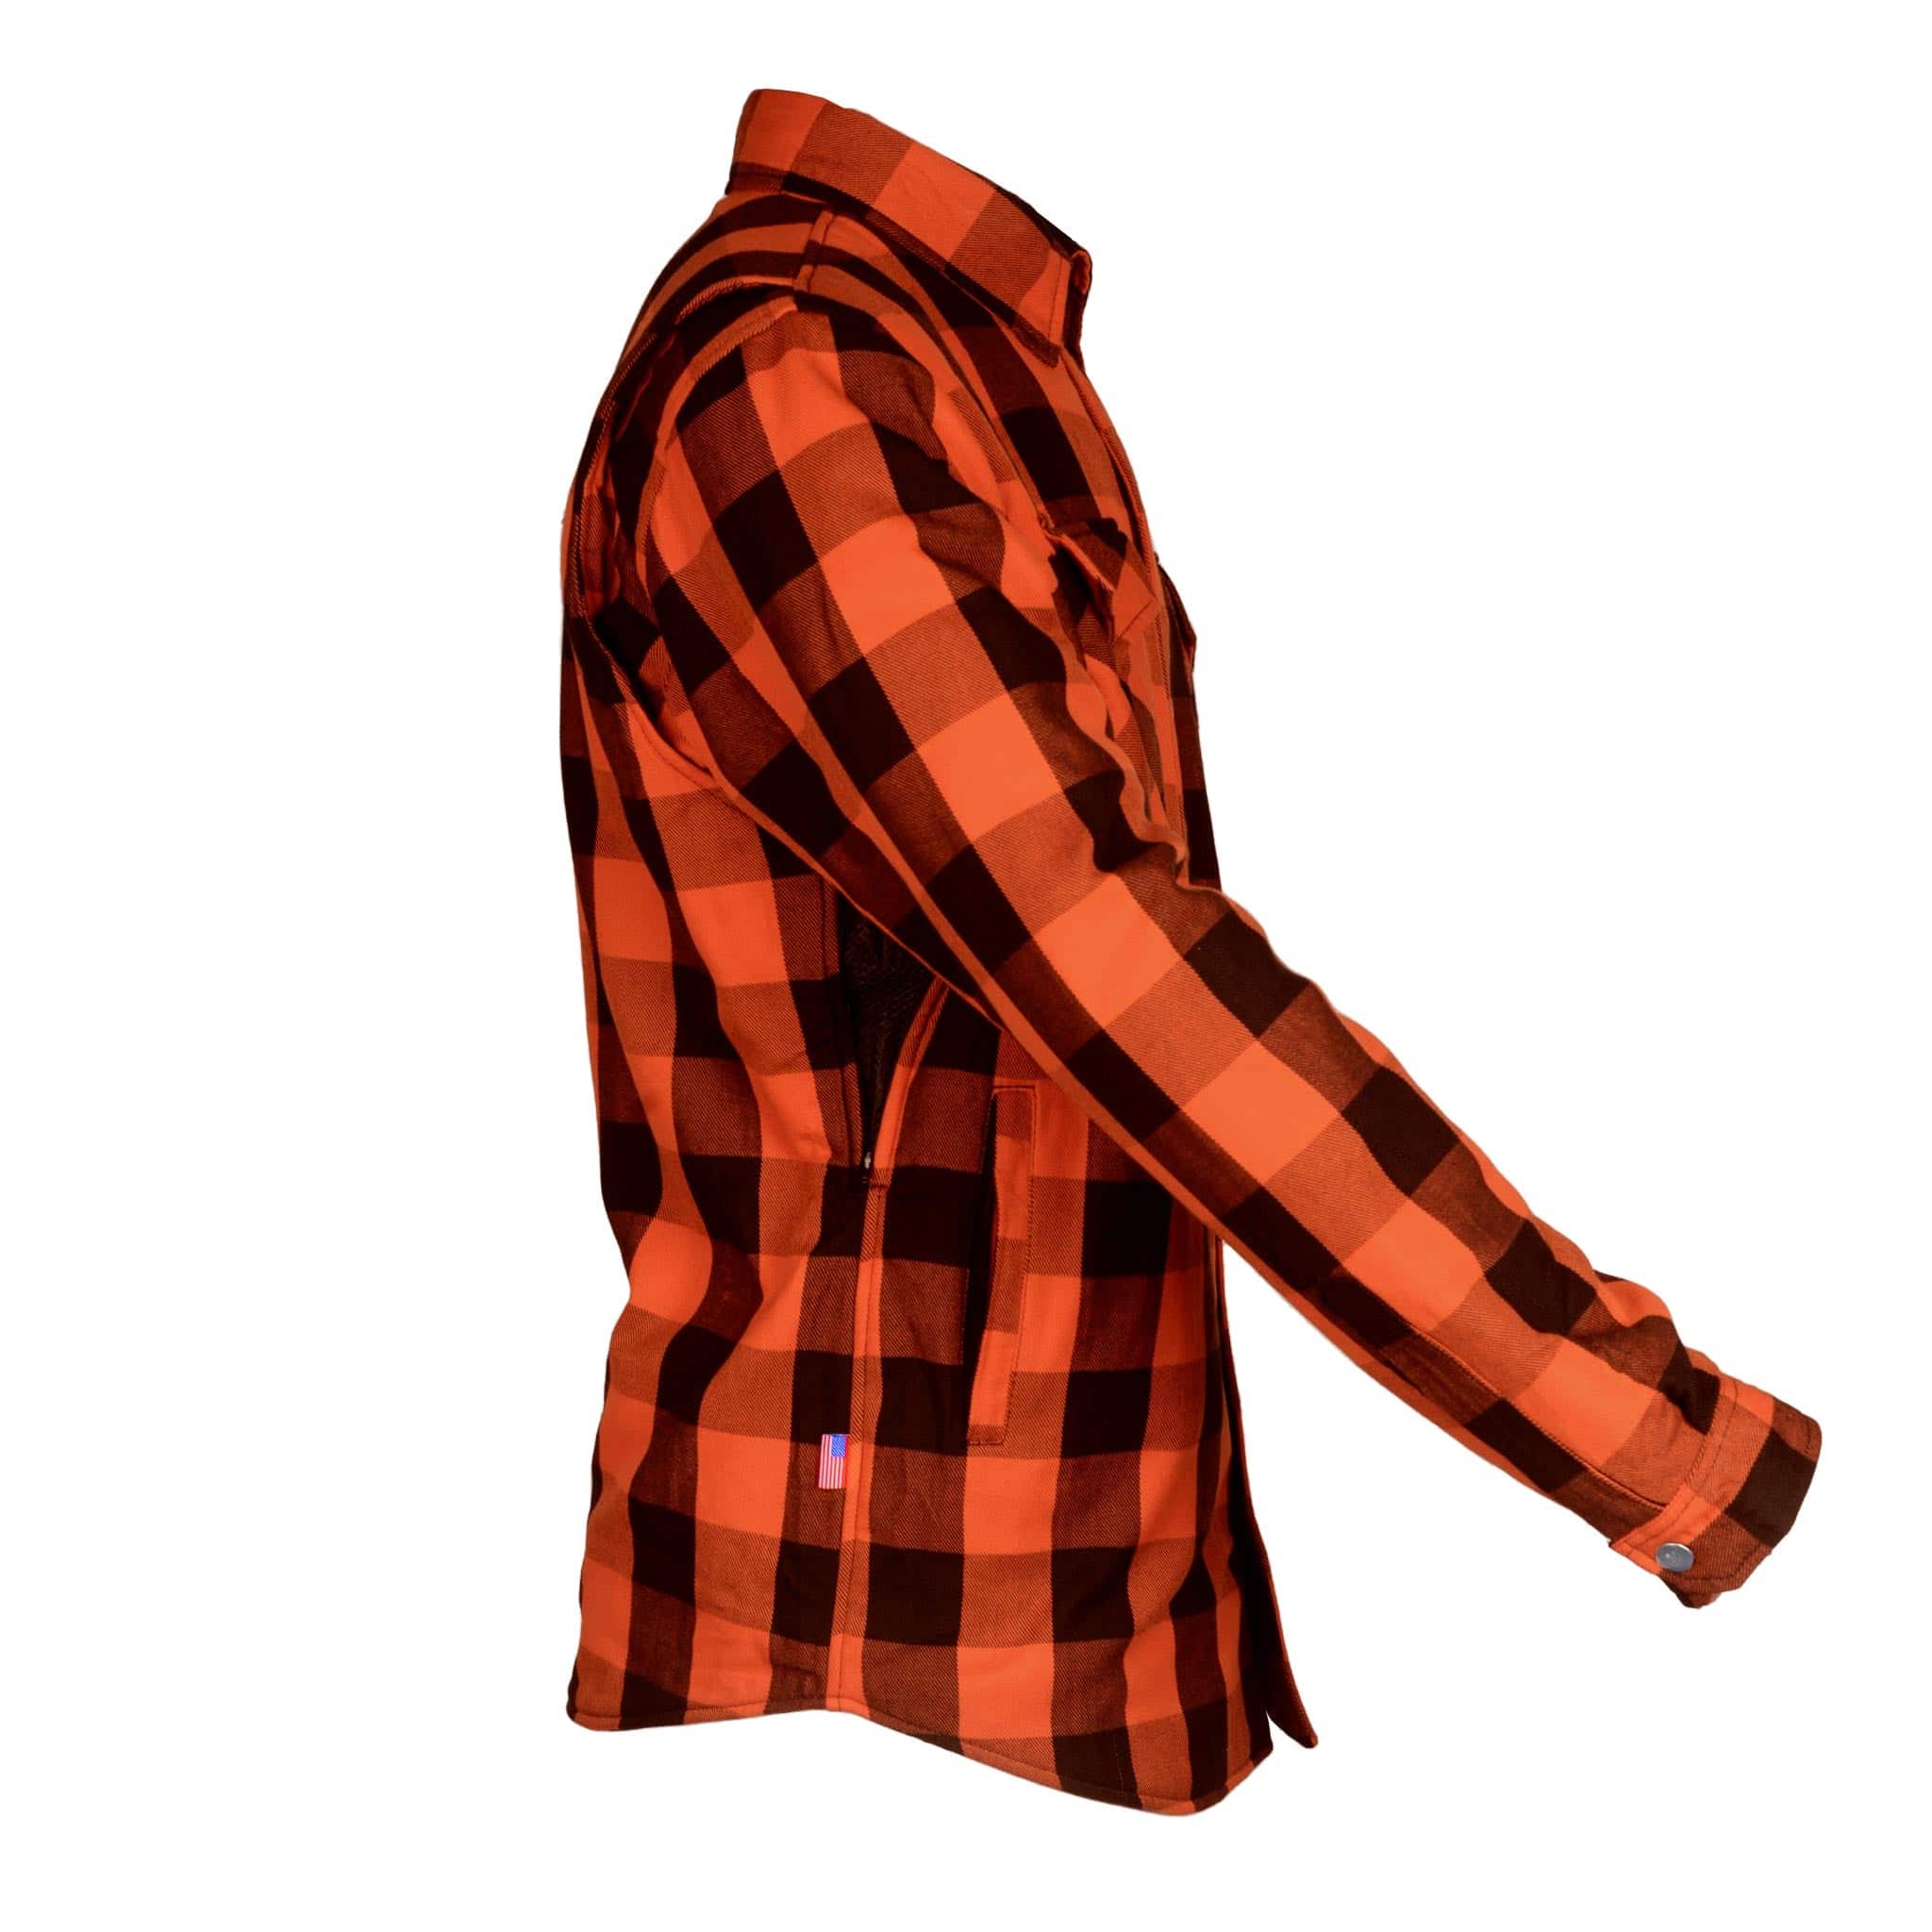 Protective Flannel Shirt "Autumn Blast" - Orange and Black Checkered with Pads